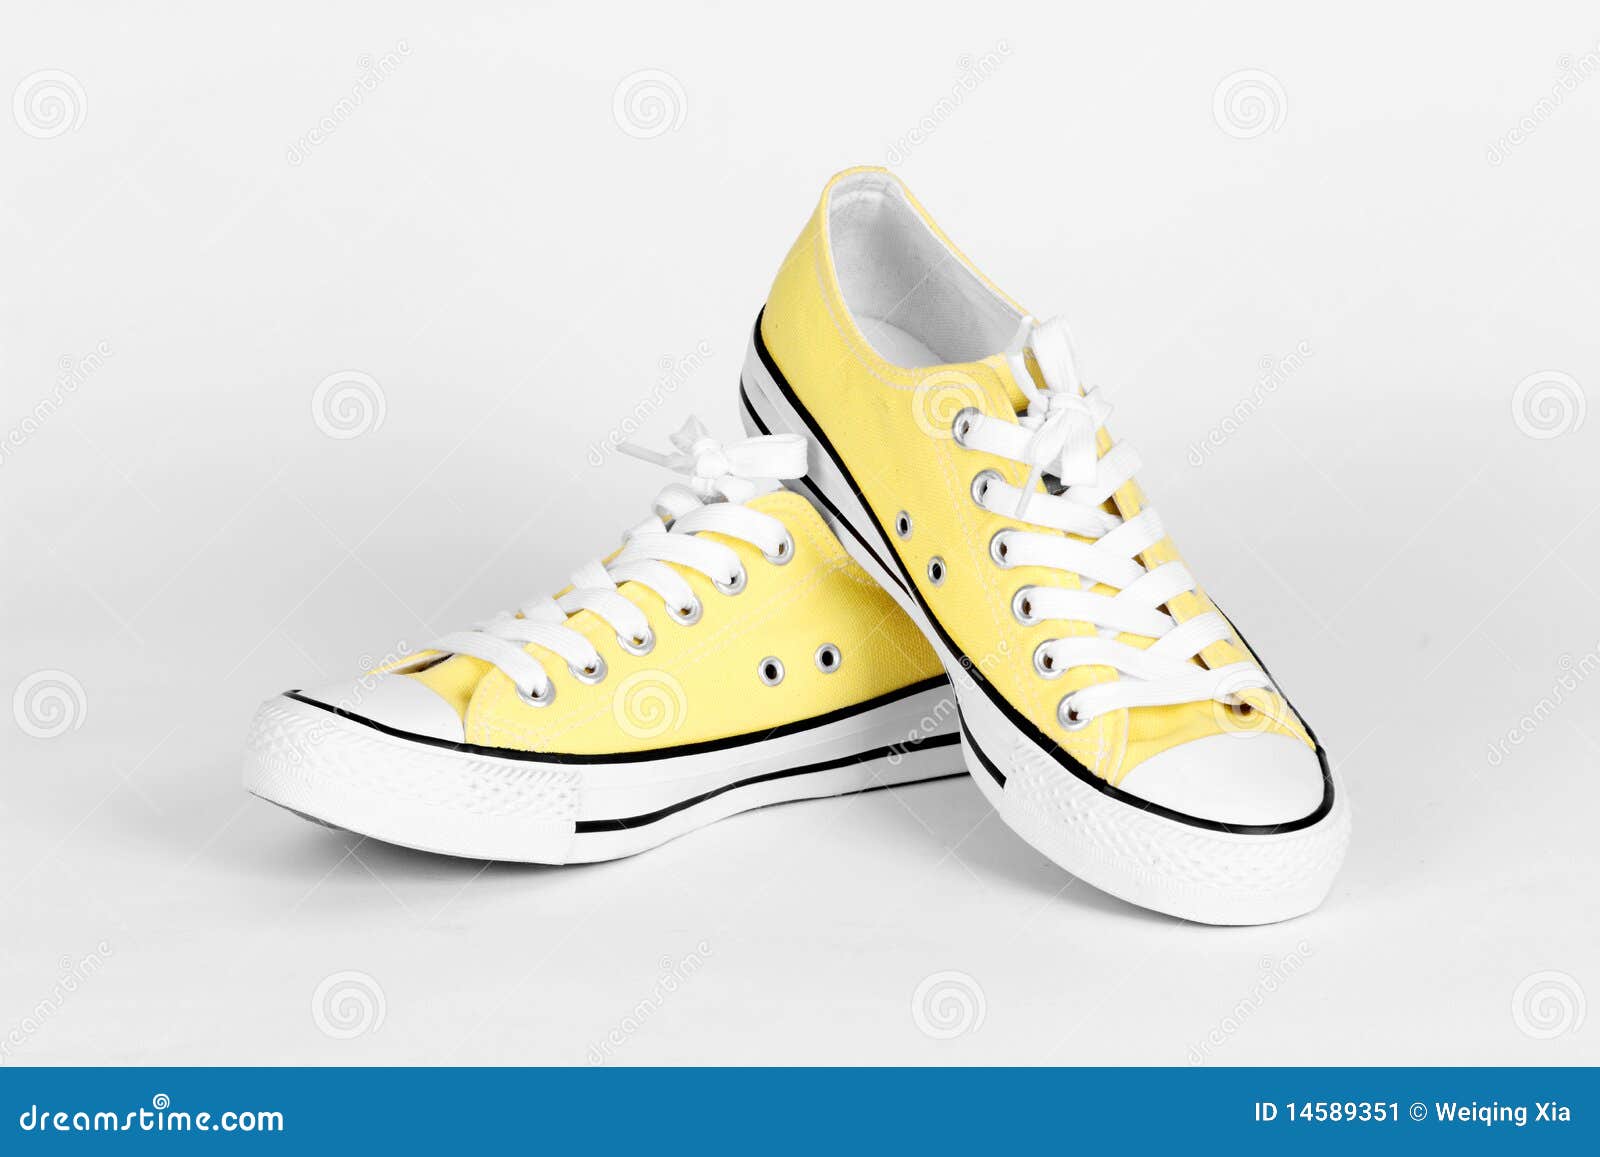 Yellow canvas shoes stock image. Image of retro, equipment - 14589351